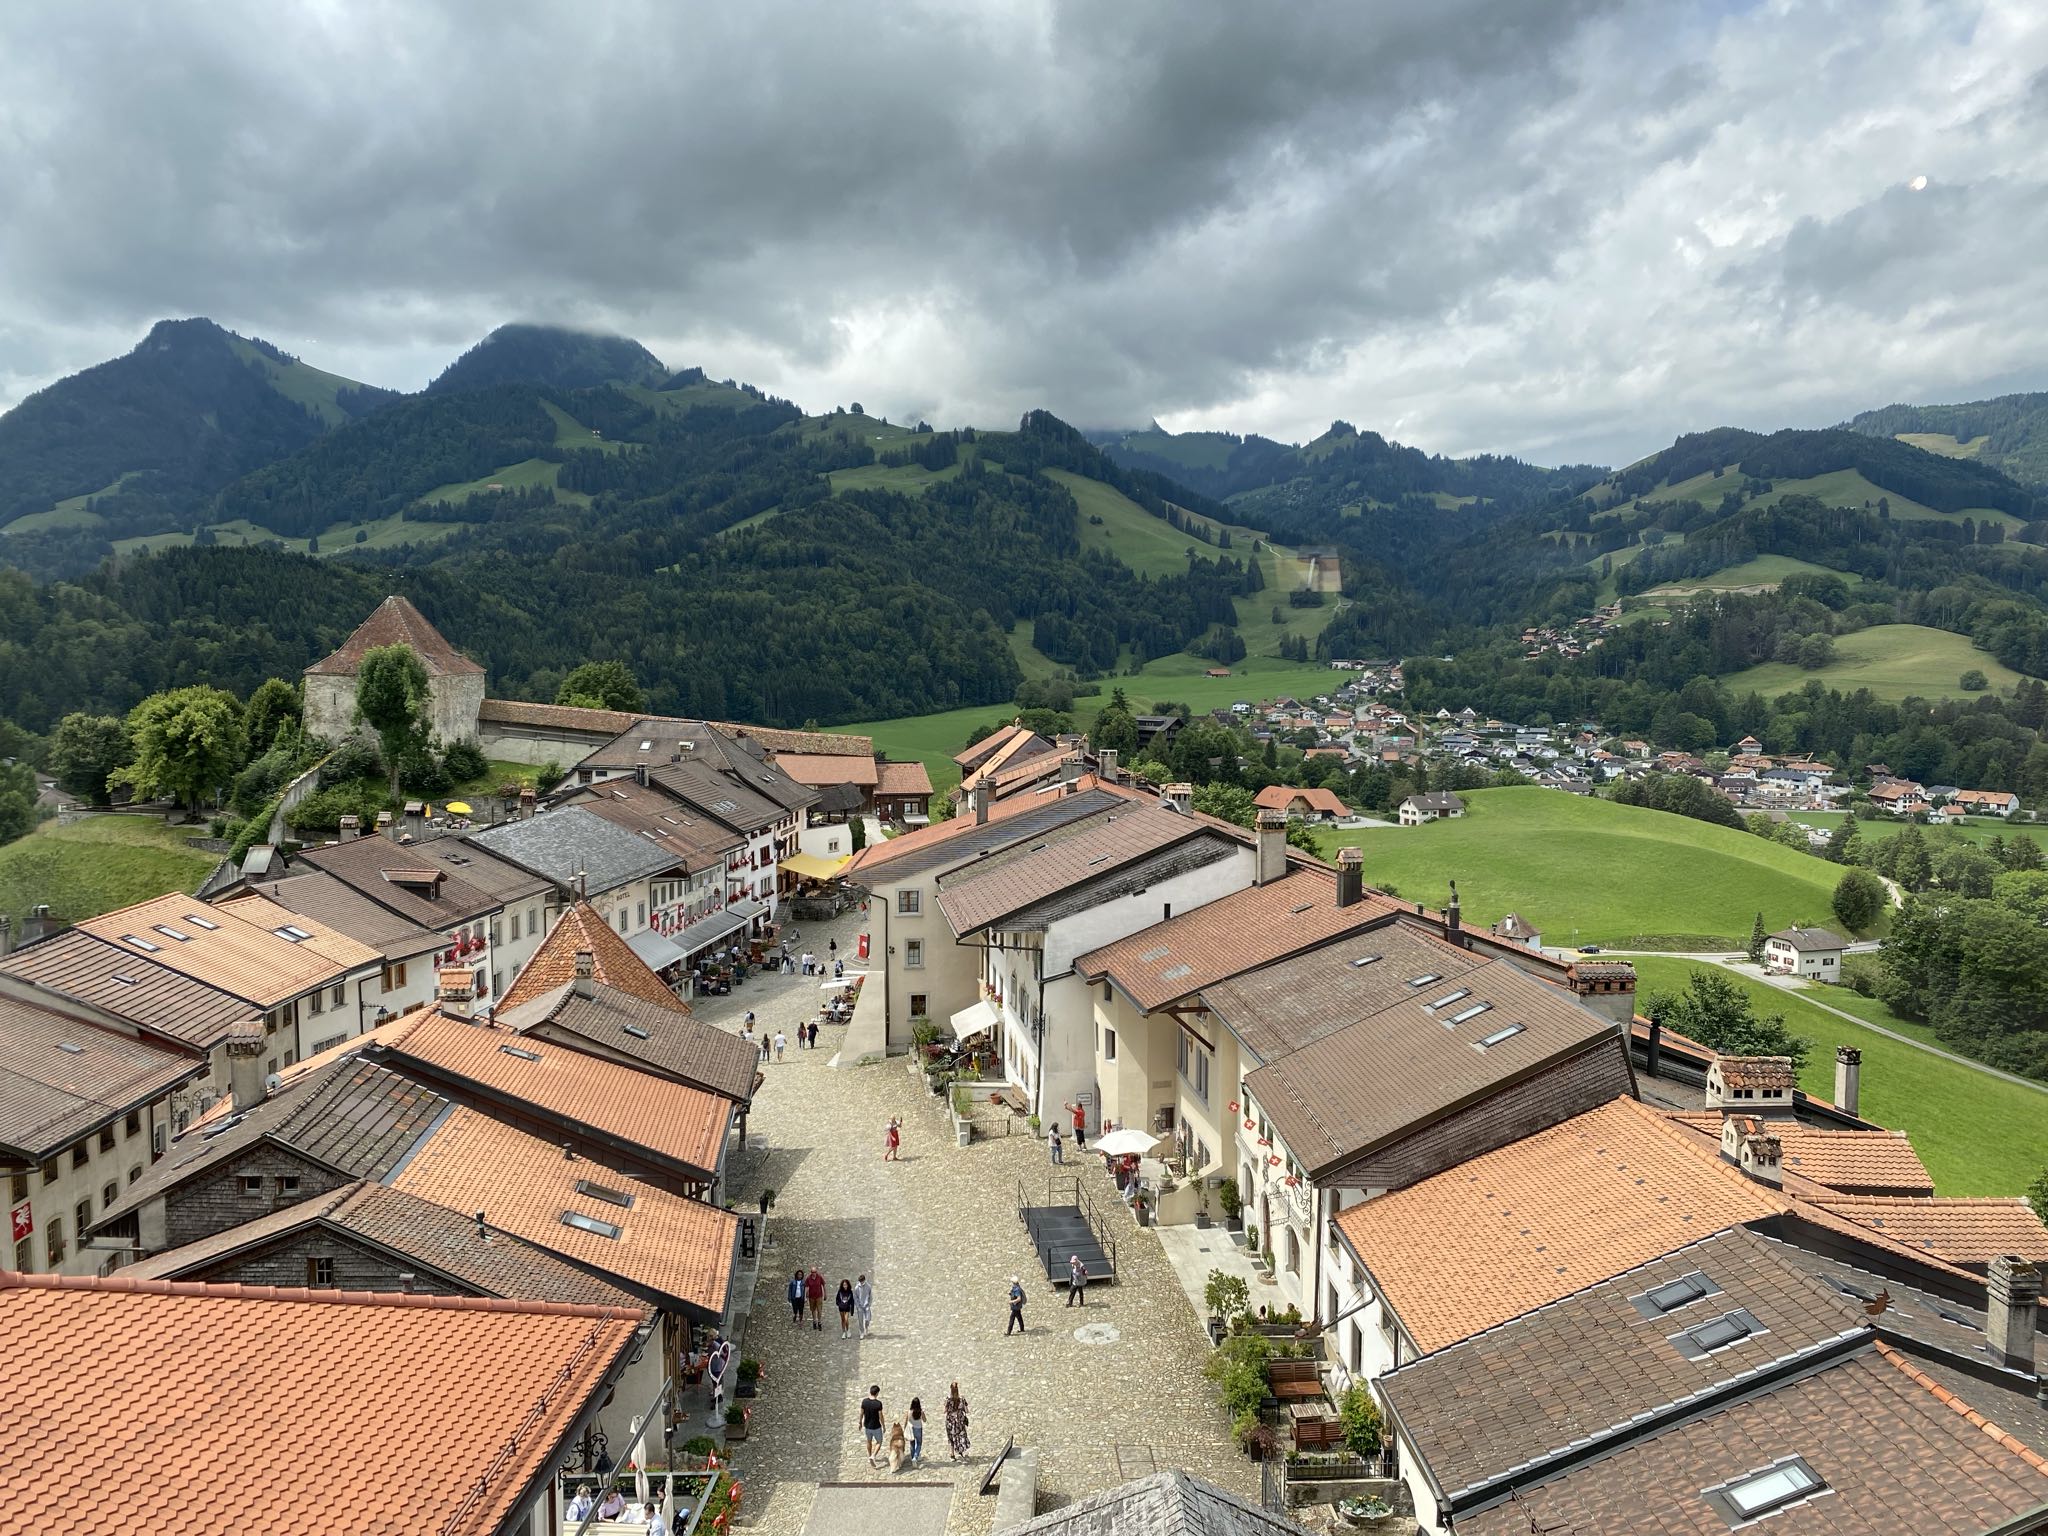 Photo 9 of 34 from the album Gruyères 2021.